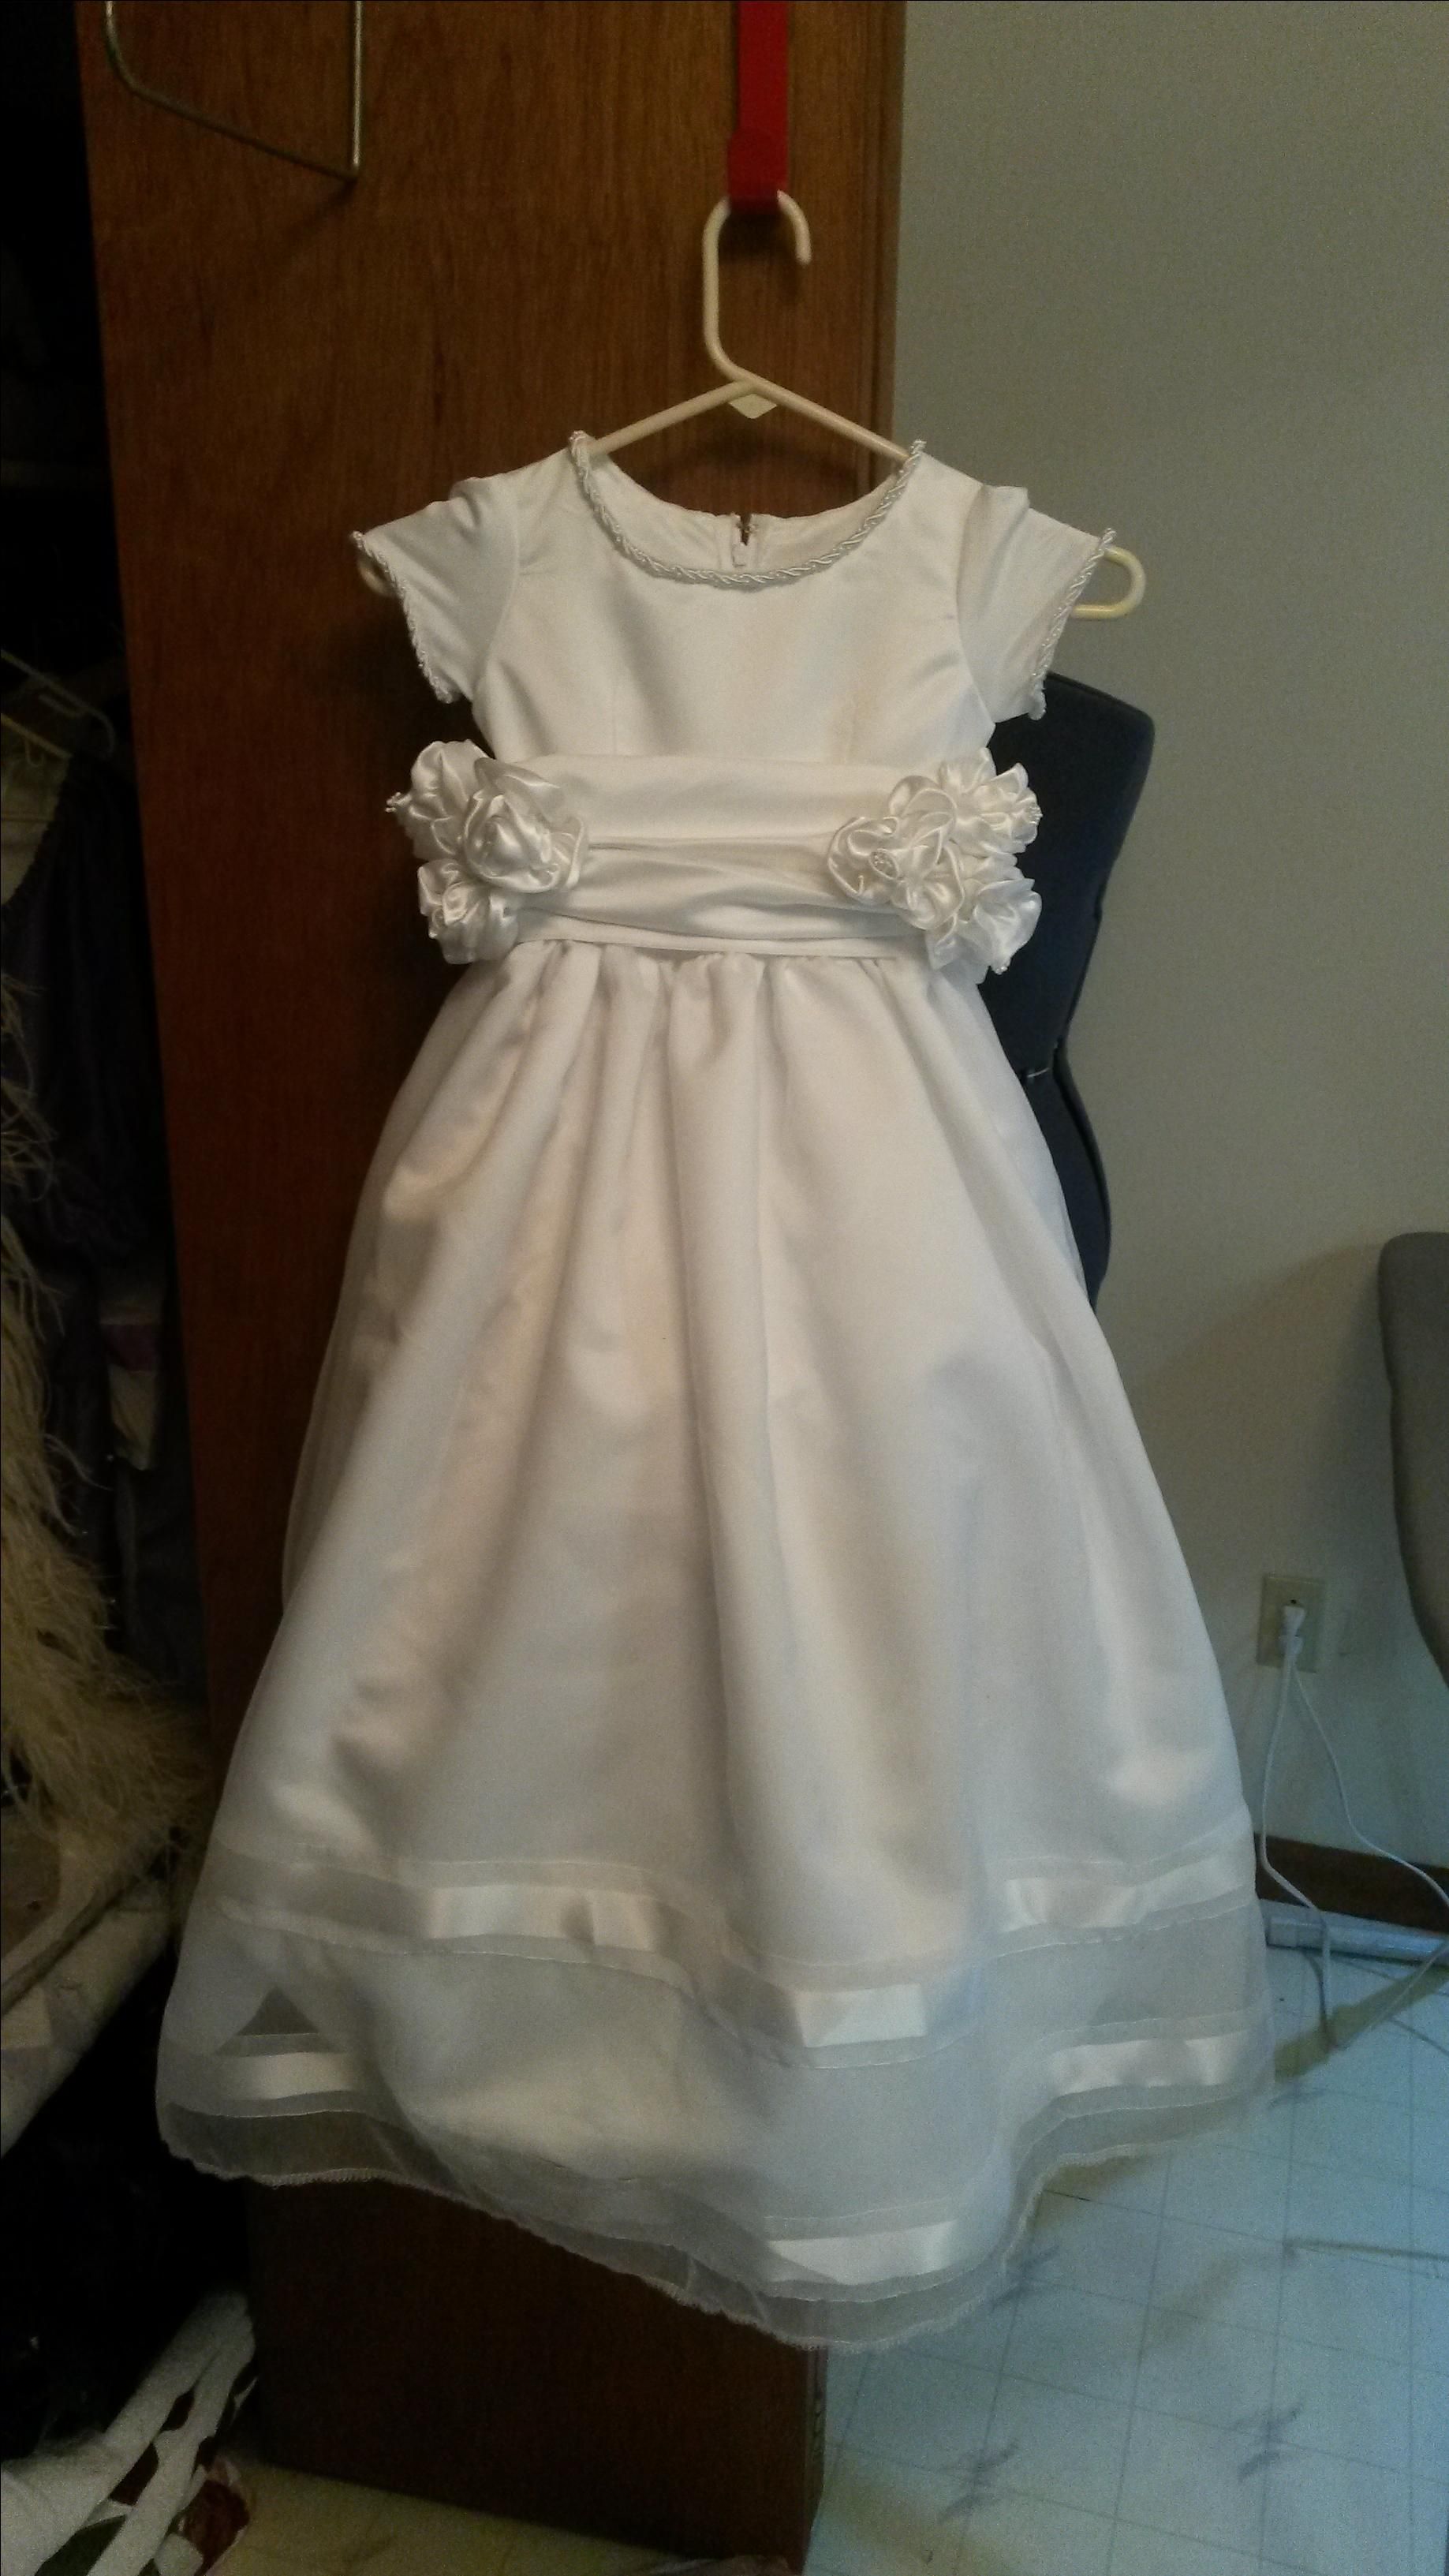 Buy Custom Made Communion Dress, made to order from Tony Bud's Sewing ...